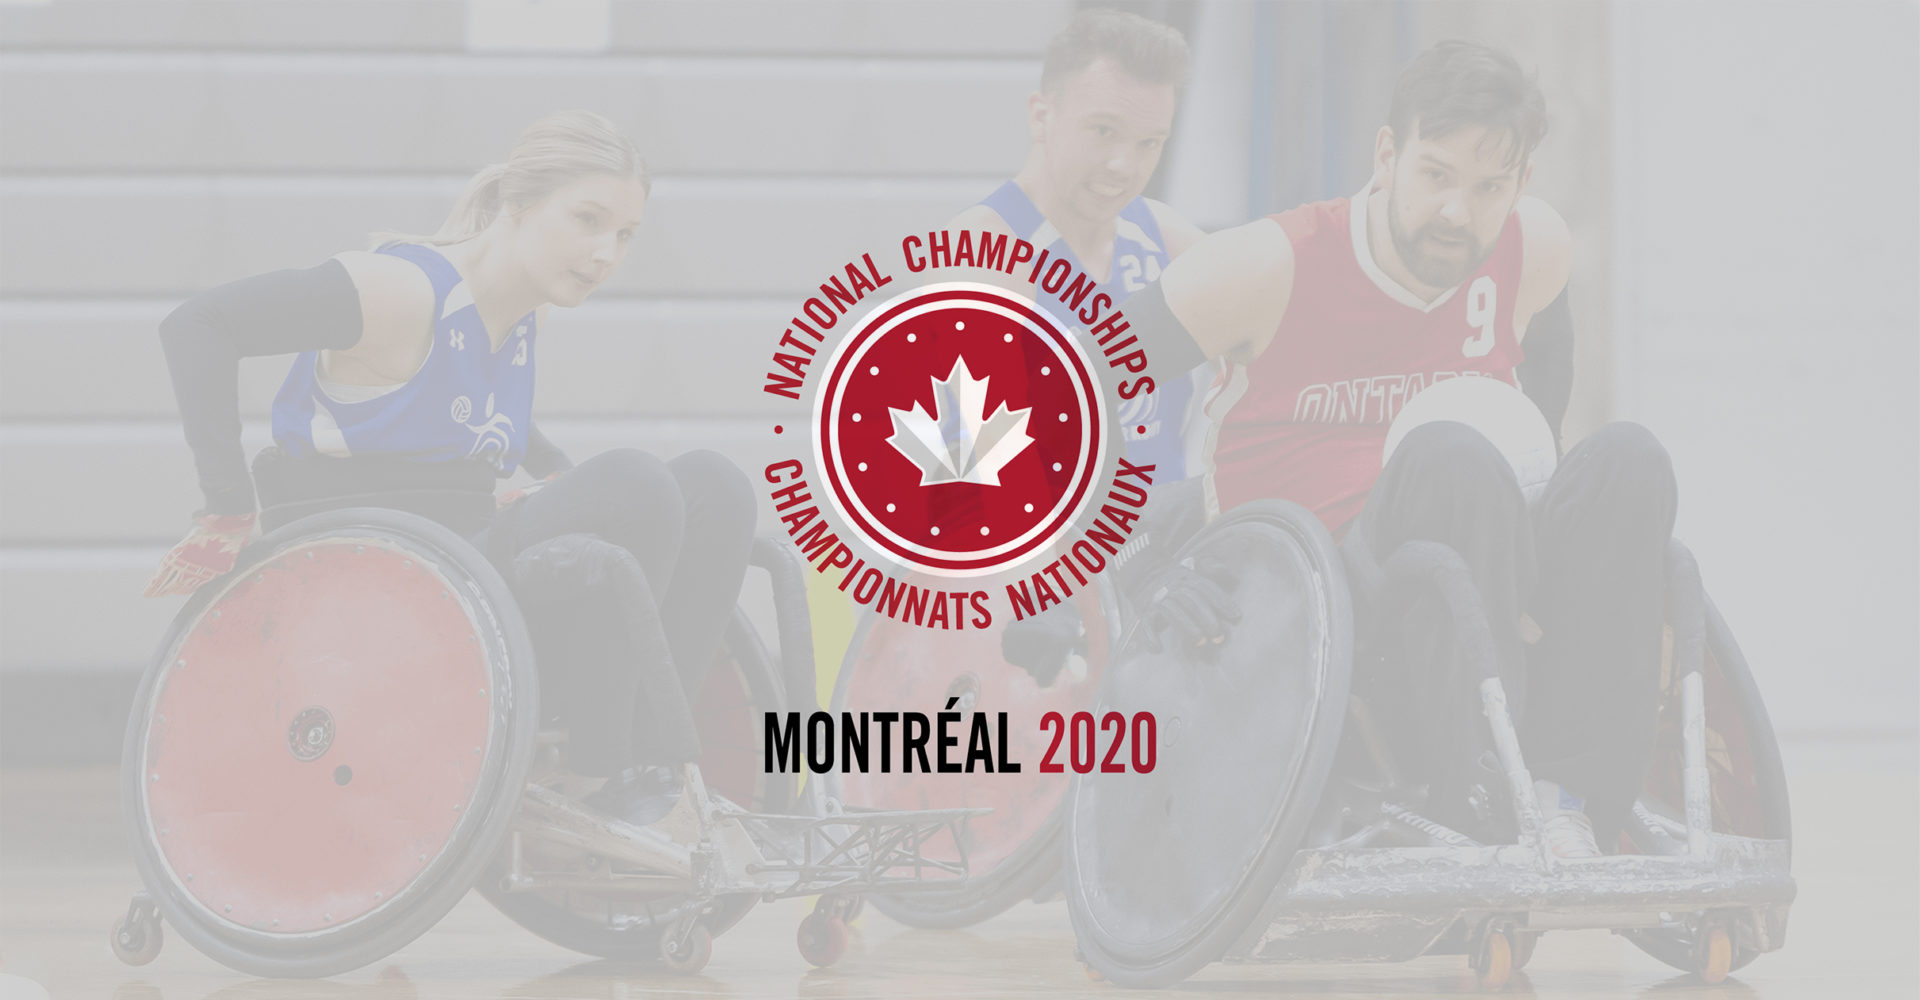 2020 NATIONAL CHAMPIONSHIPS TO BE HELD IN MONTREAL